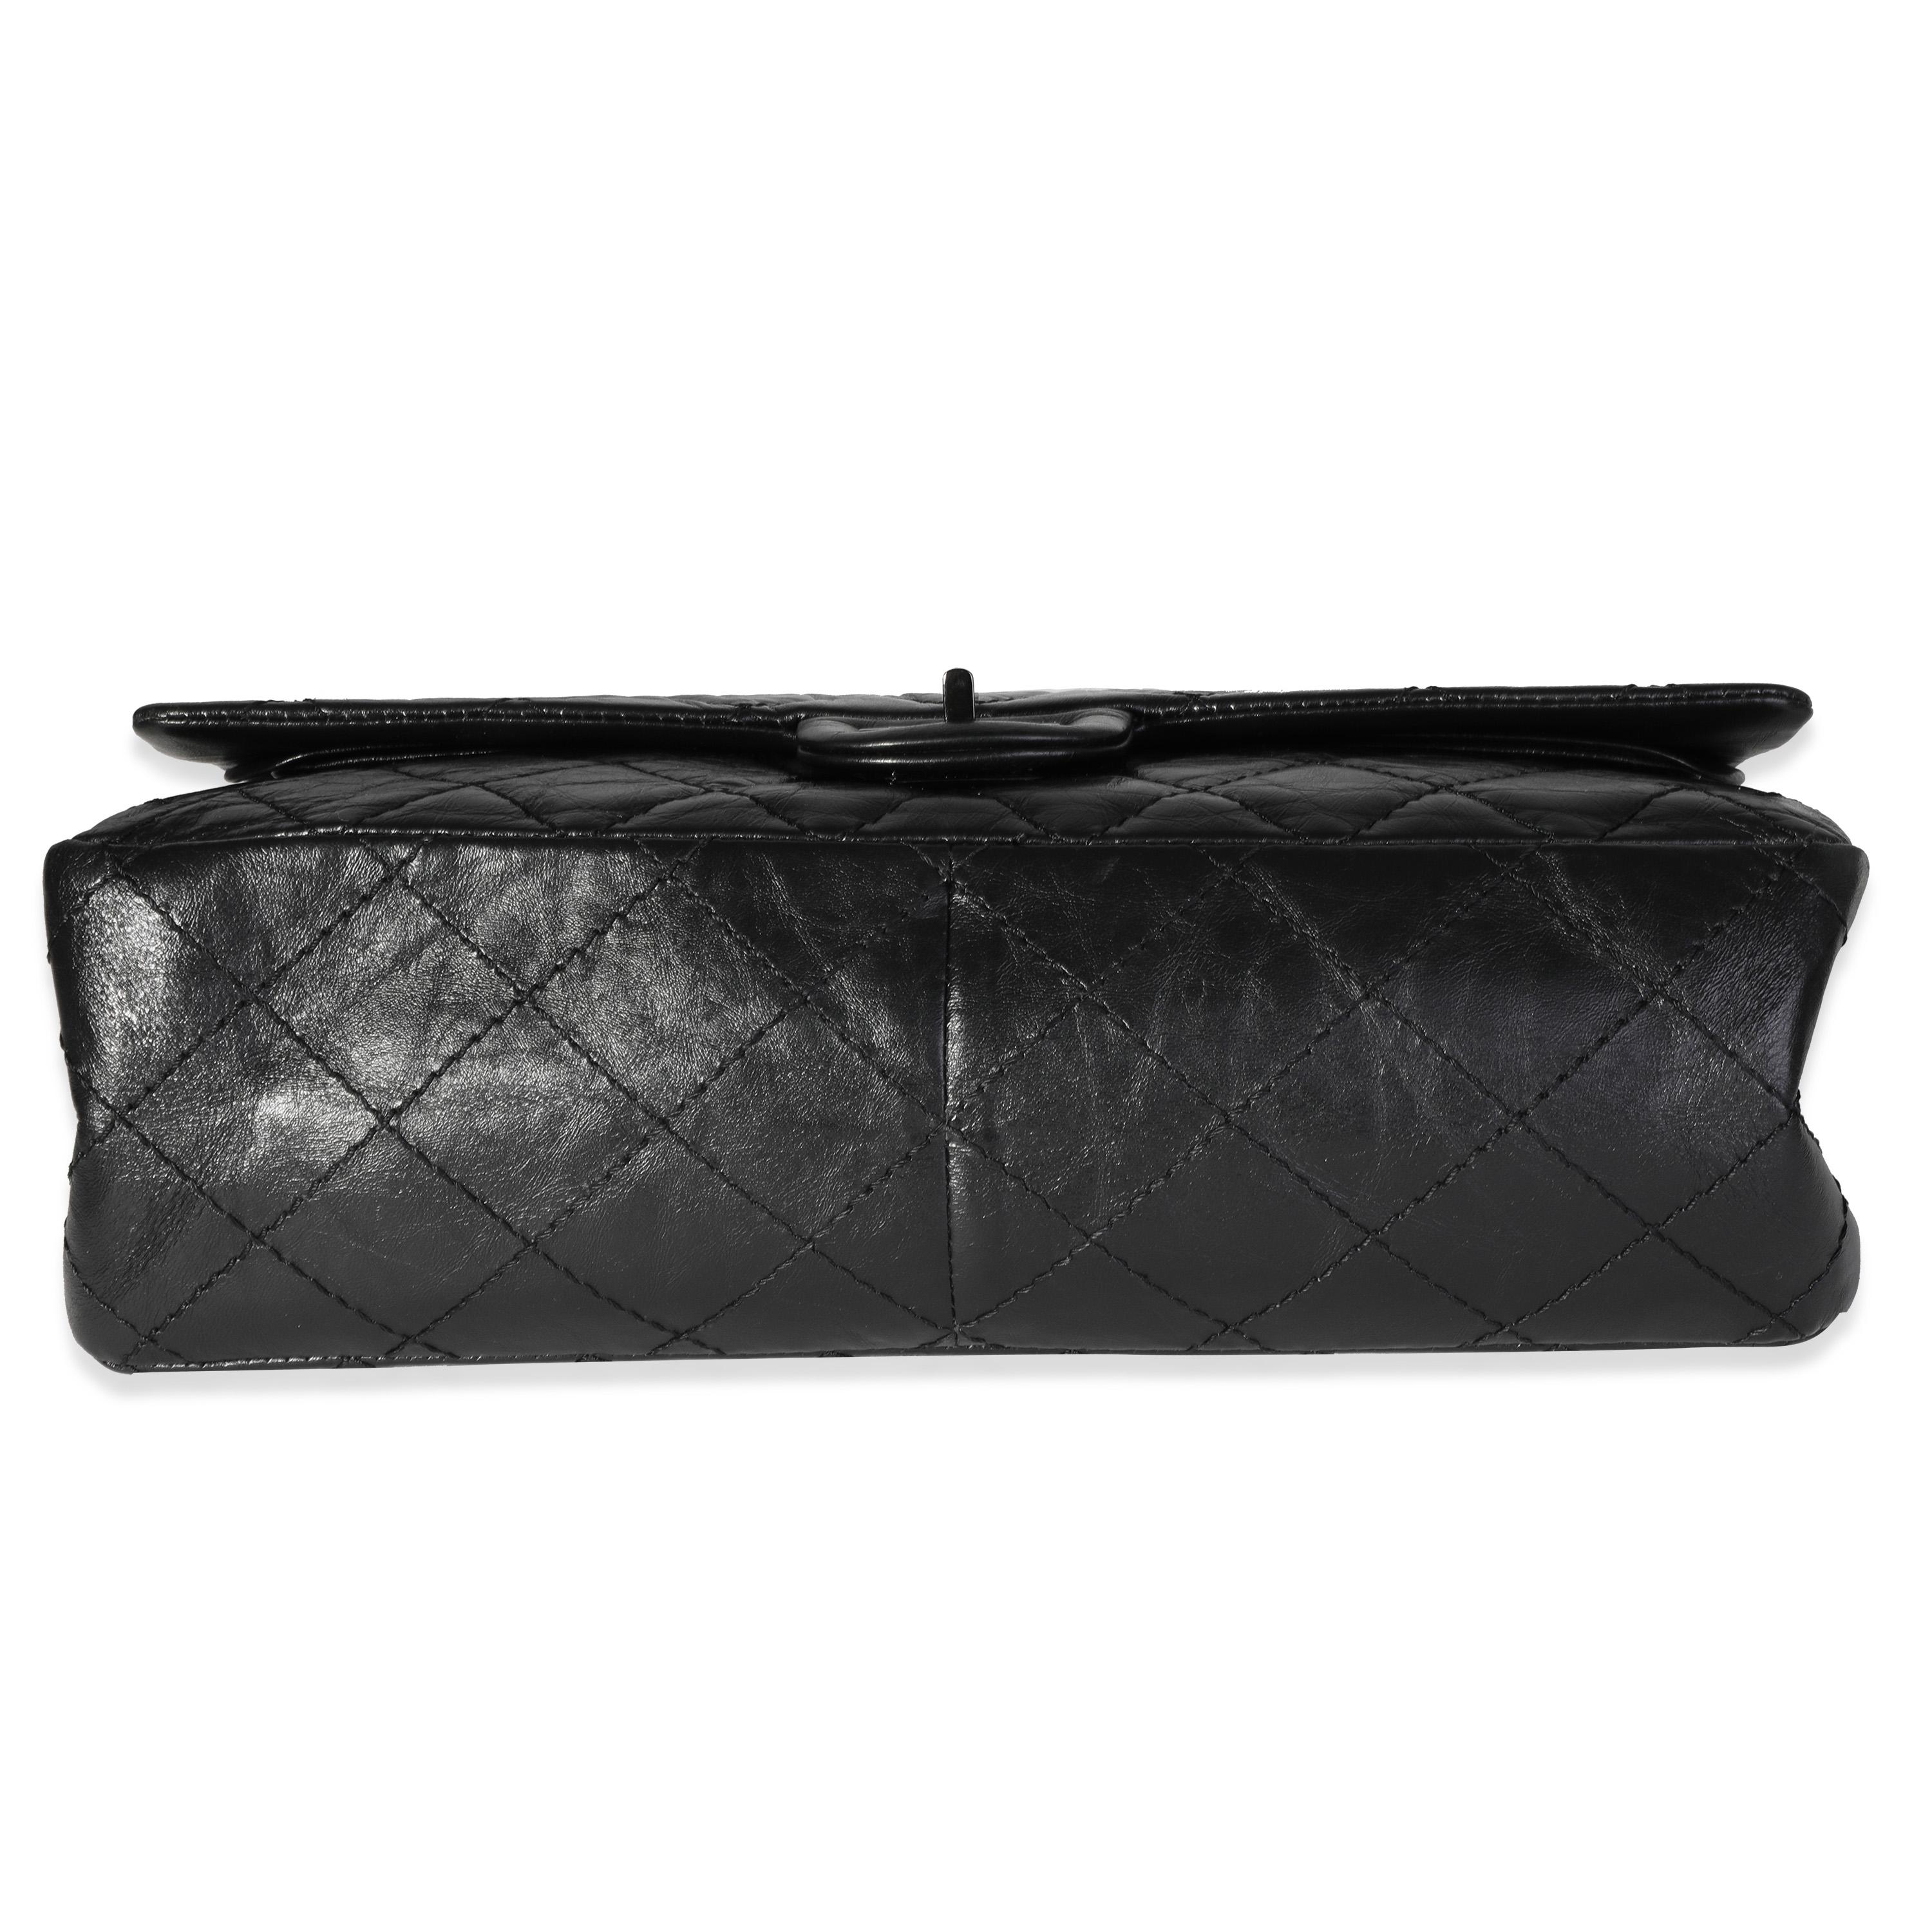 Chanel So Black Quilted Calfskin Reissue 2.55 226 Double Flap Bag 2